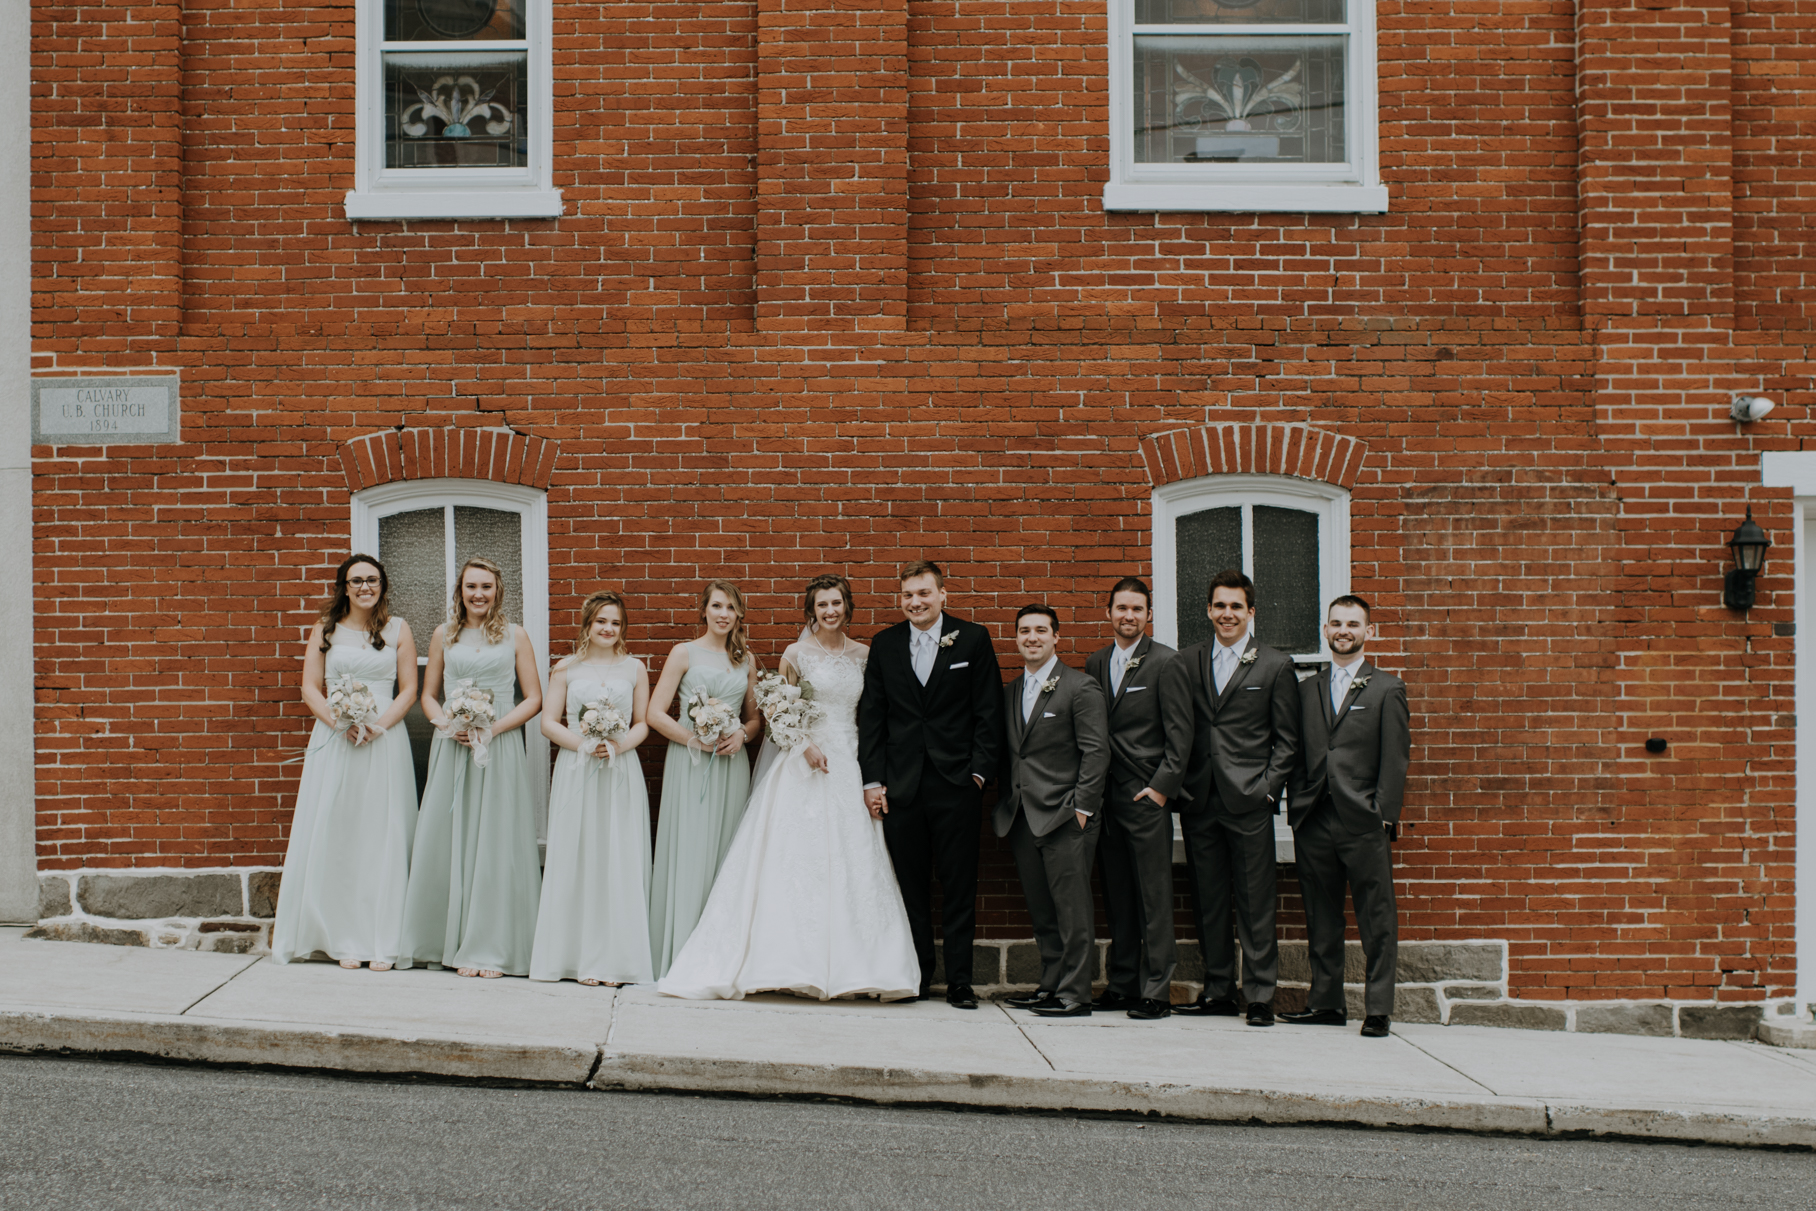 freehearted film co | tampa wedding photo and film | pa wedding